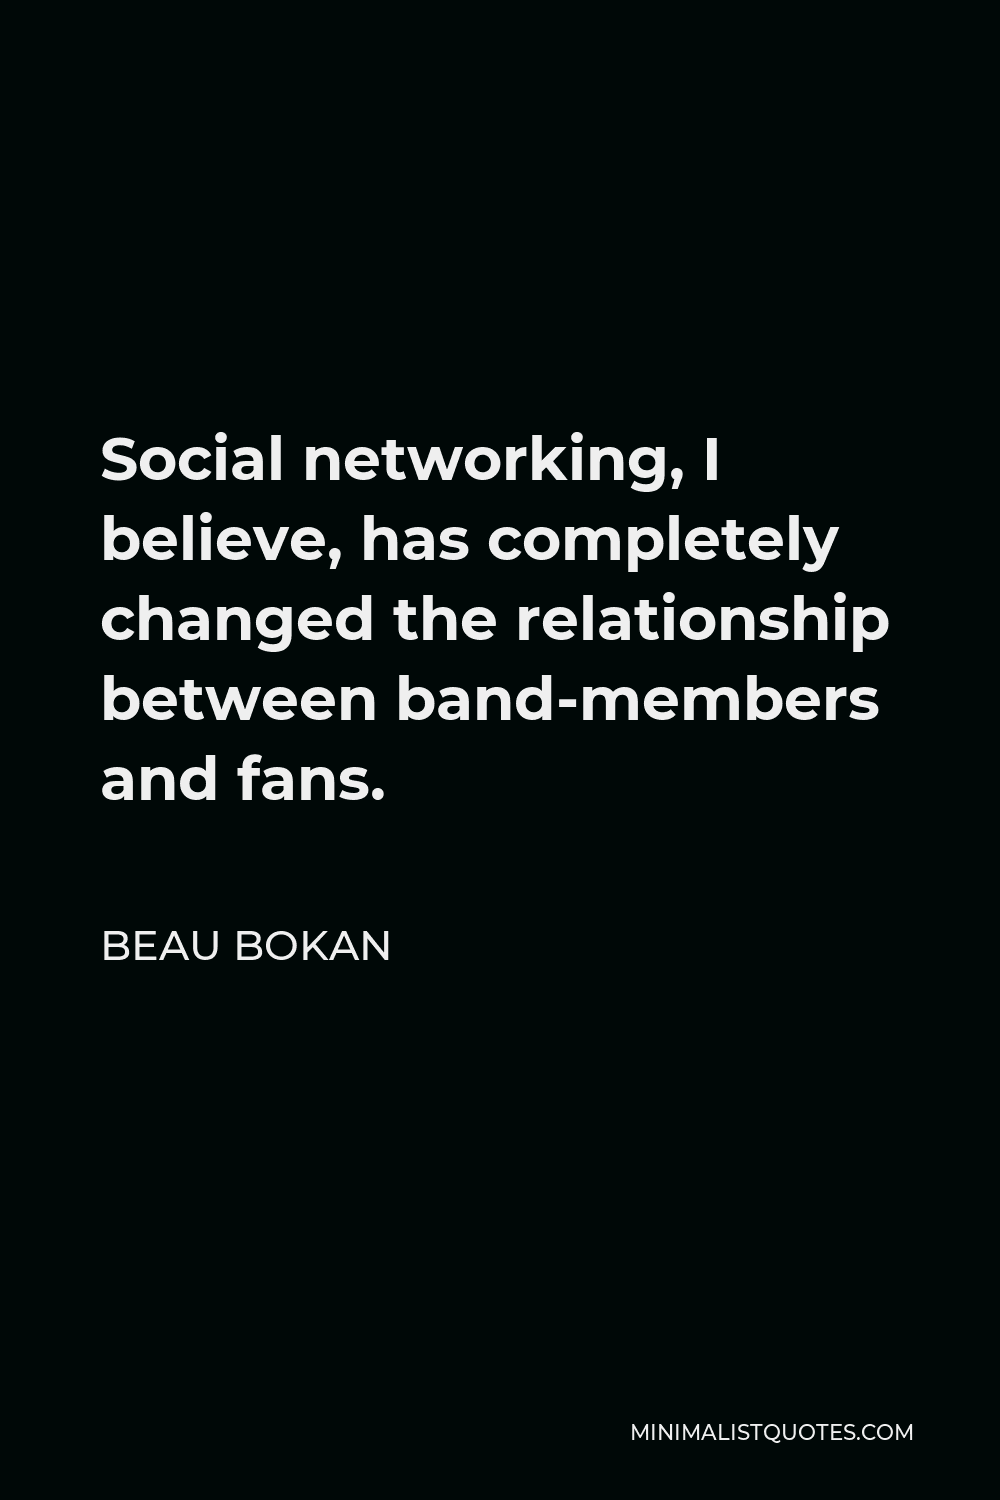 Beau Bokan Quote - Social networking, I believe, has completely changed the relationship between band-members and fans.